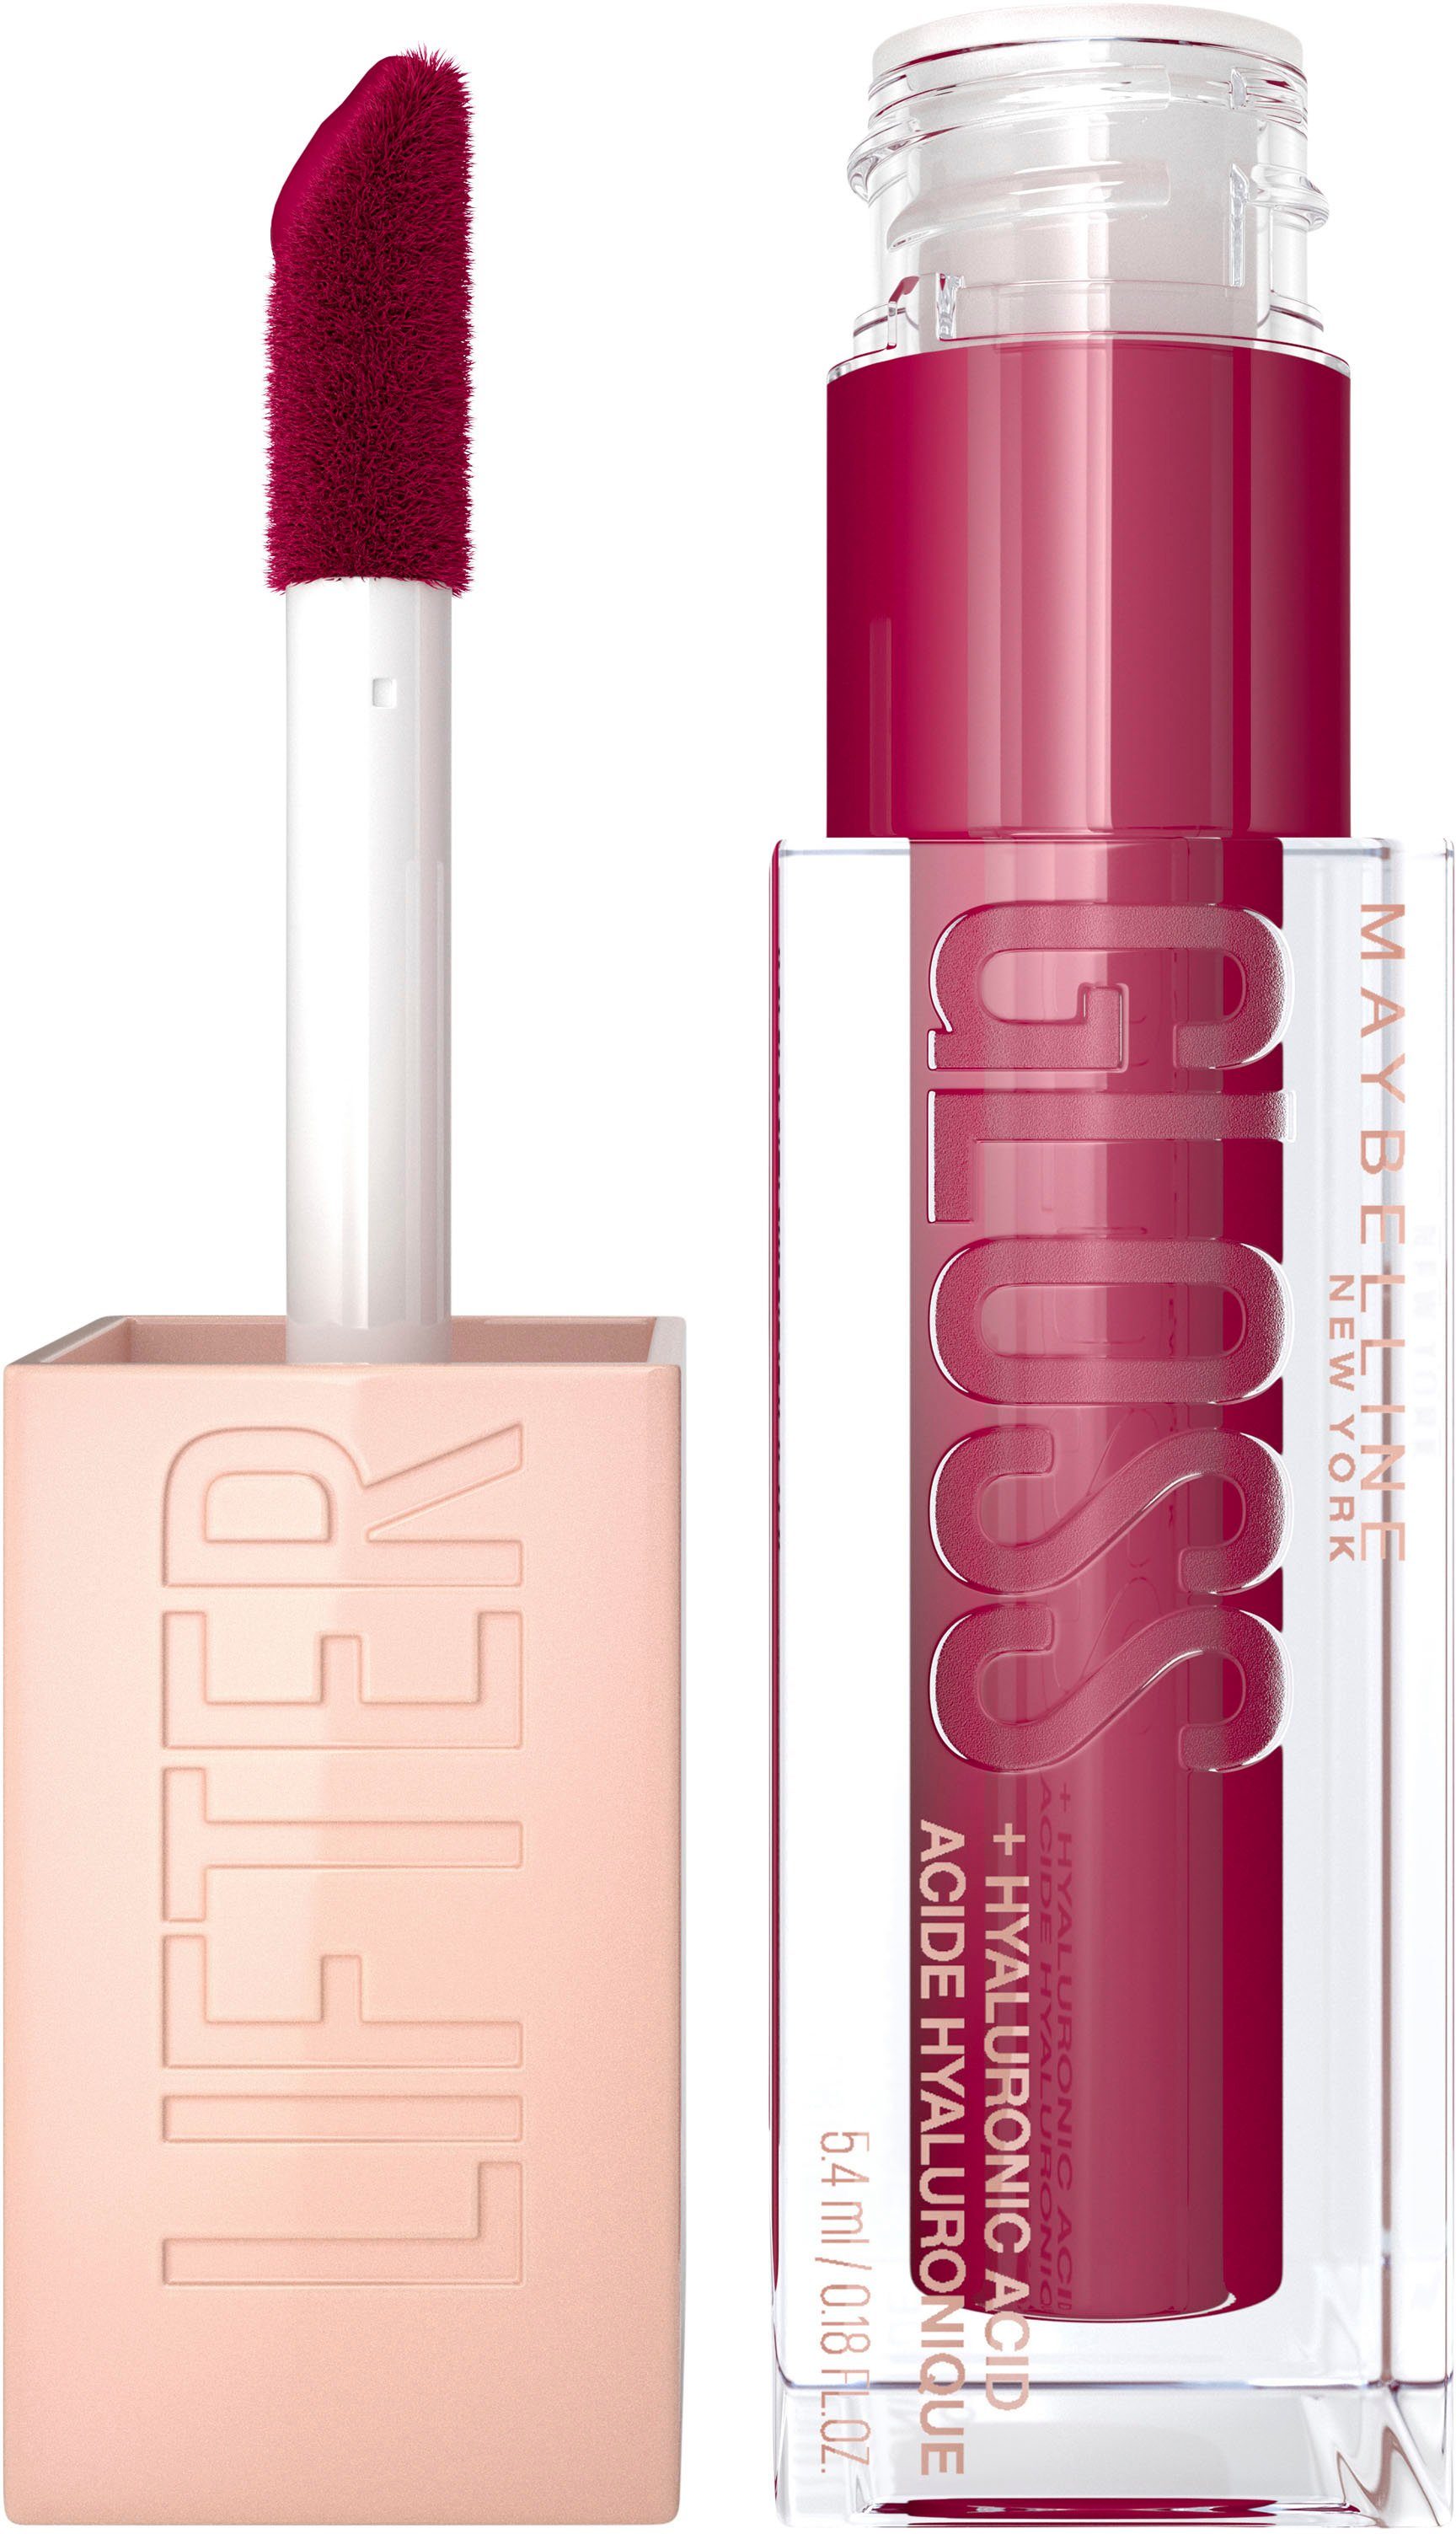 MAYBELLINE NEW YORK Lifter New Gloss Maybelline Lipgloss York